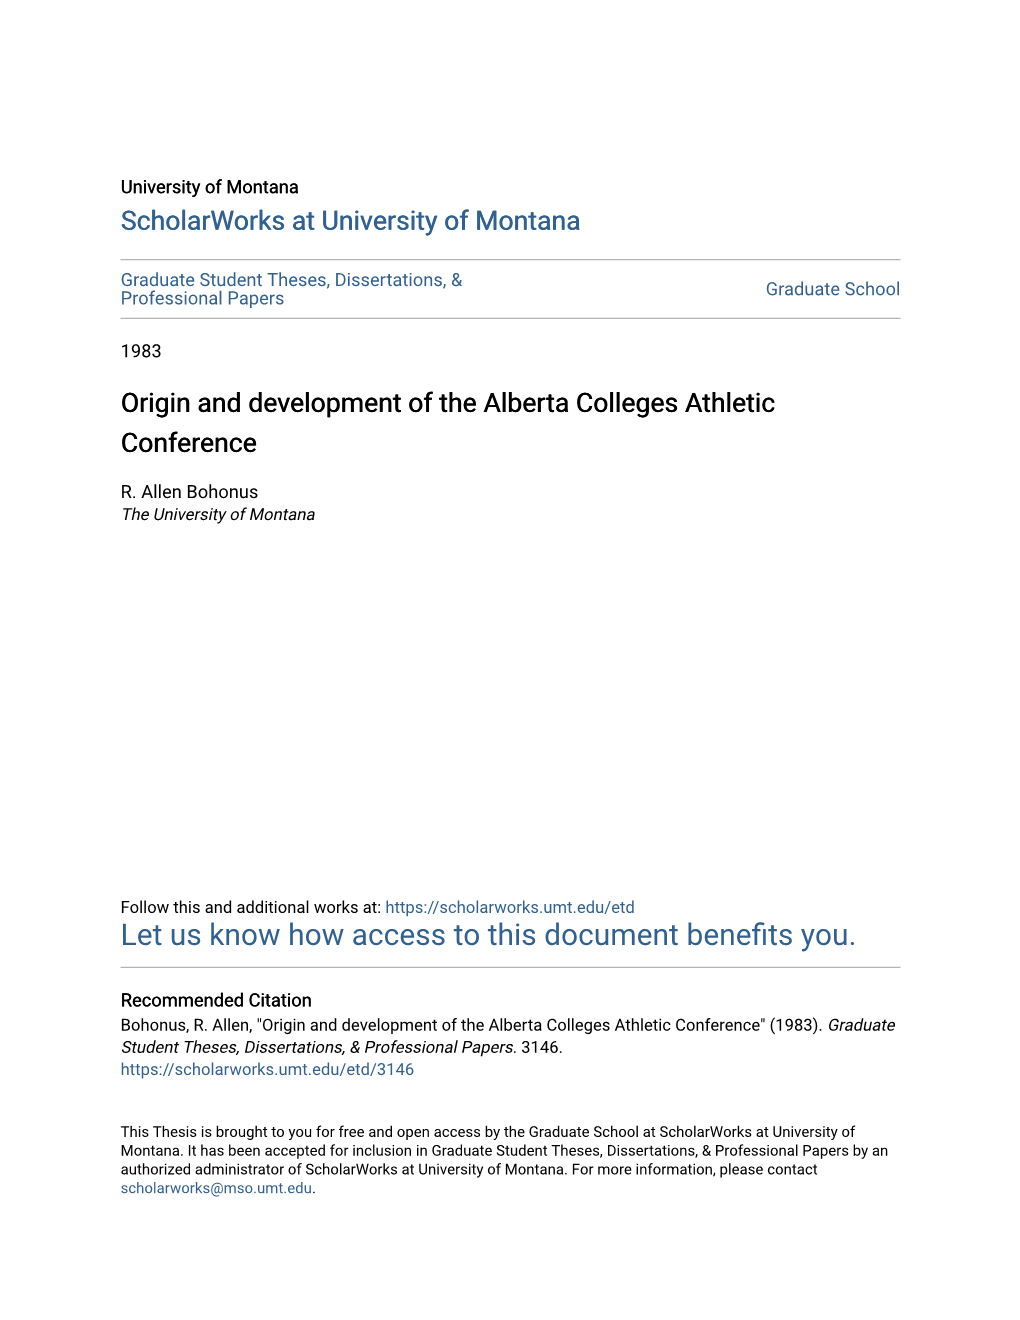 Origin and Development of the Alberta Colleges Athletic Conference